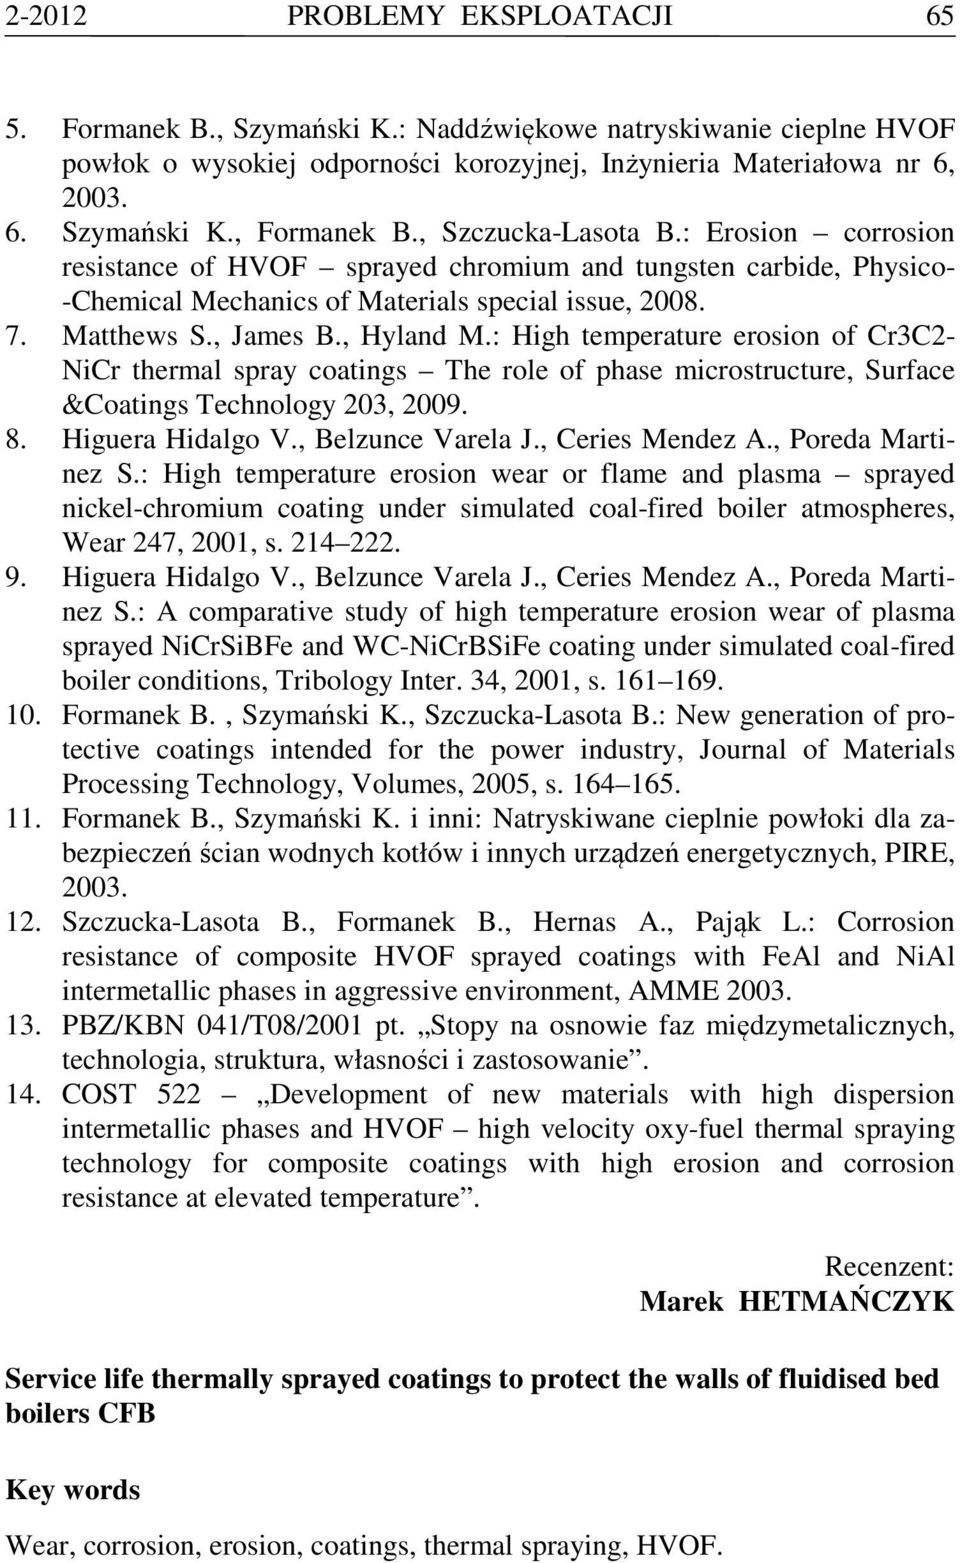 : High temperature erosion of Cr3C2- NiCr thermal spray coatings The role of phase microstructure, Surface &Coatings Technology 203, 2009. 8. Higuera Hidalgo V., Belzunce Varela J., Ceries Mendez A.